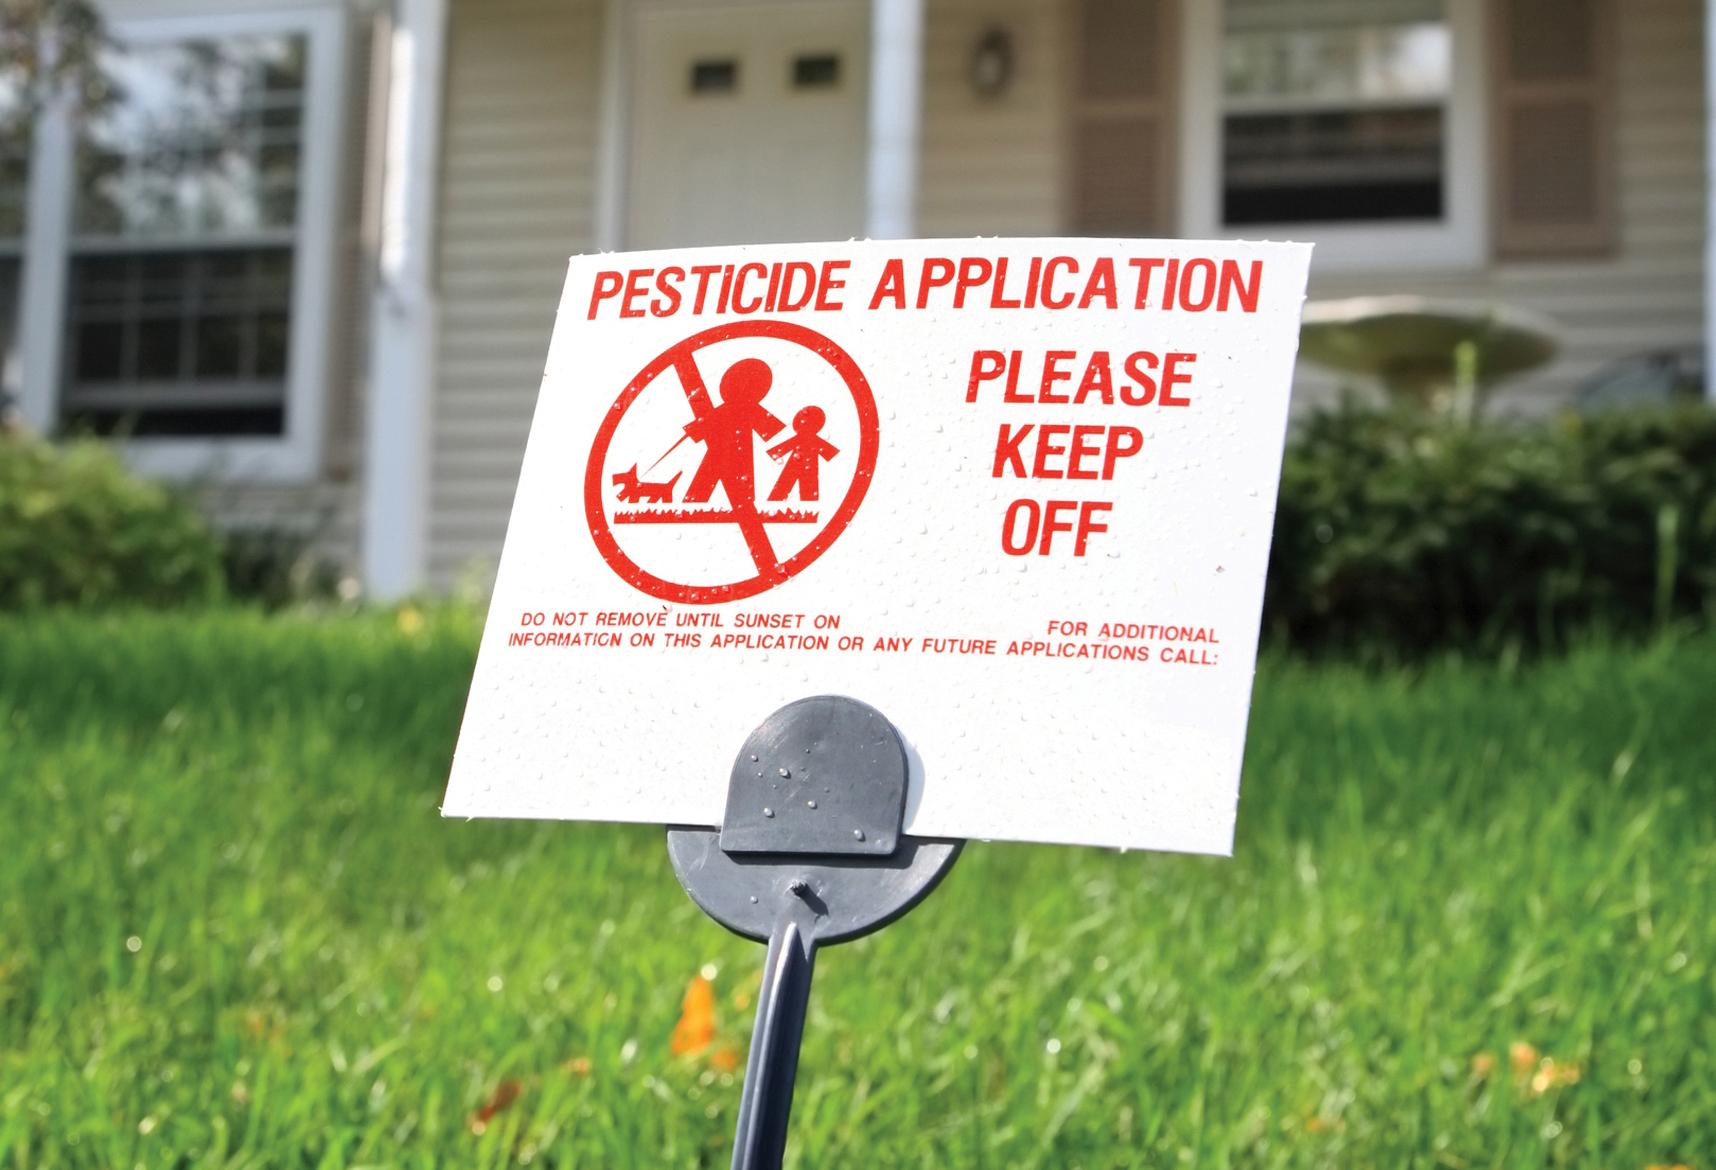 Pesticides target unwanted insects, plants and fungi but bring unintended consequences such as harming beneficial insects, other wildlife and sometimes people, according to the Midwest Action Pesticide Center. (Midwest Action Pesticide Center)